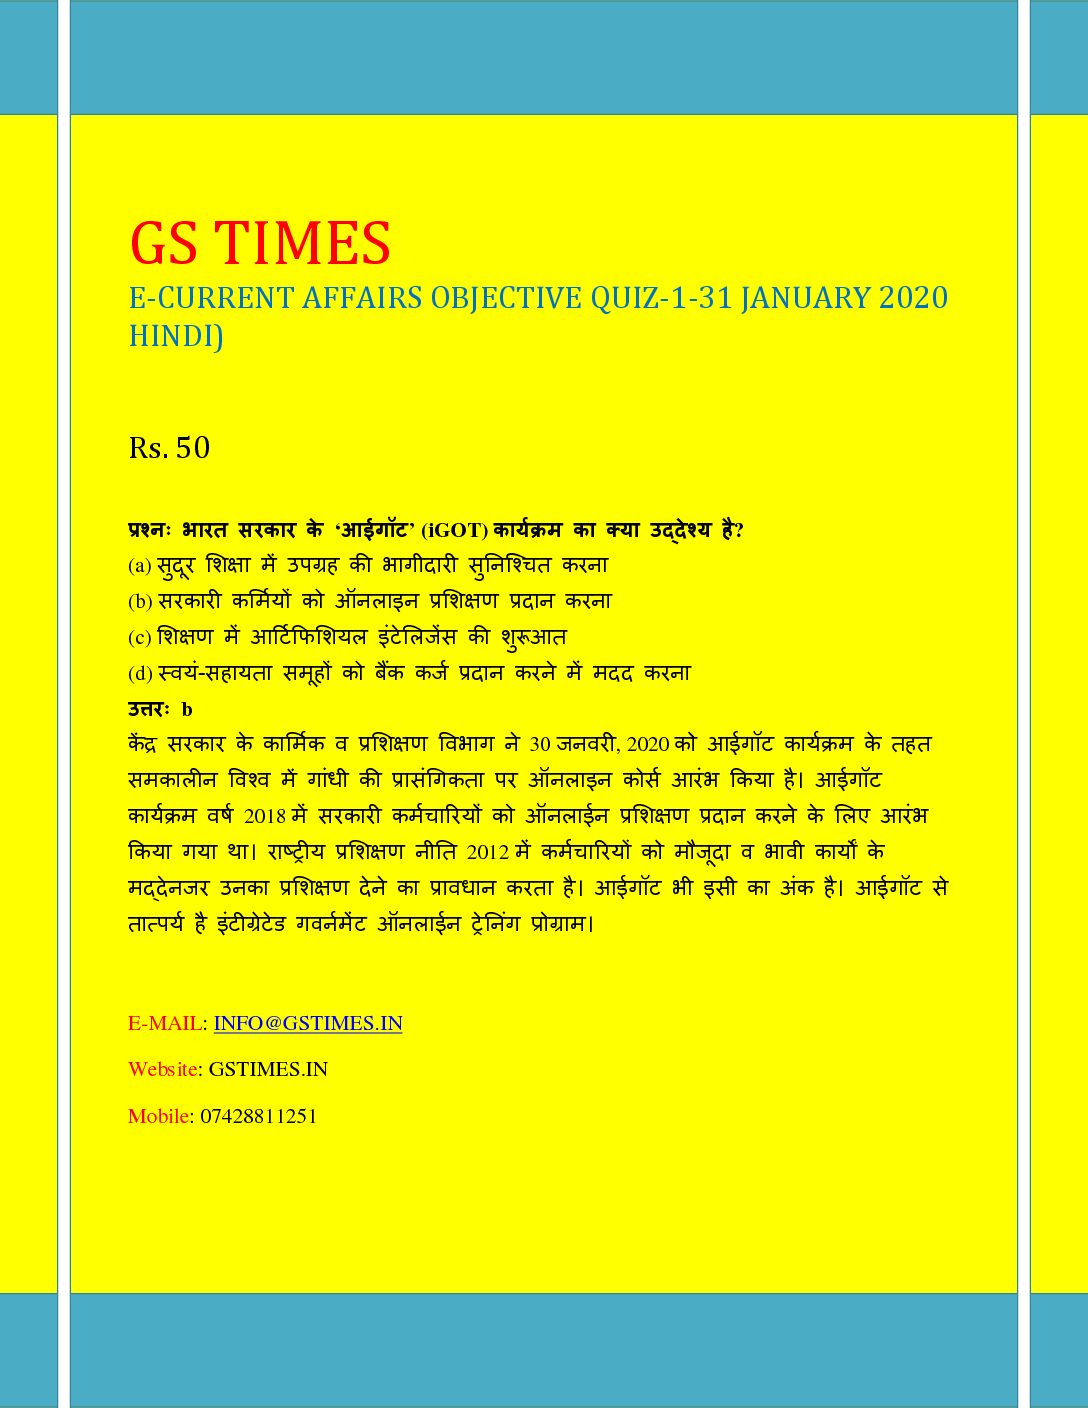 Current Affairs Objective Quiz Answer and Explanation 1-31 January 2020 Hindi